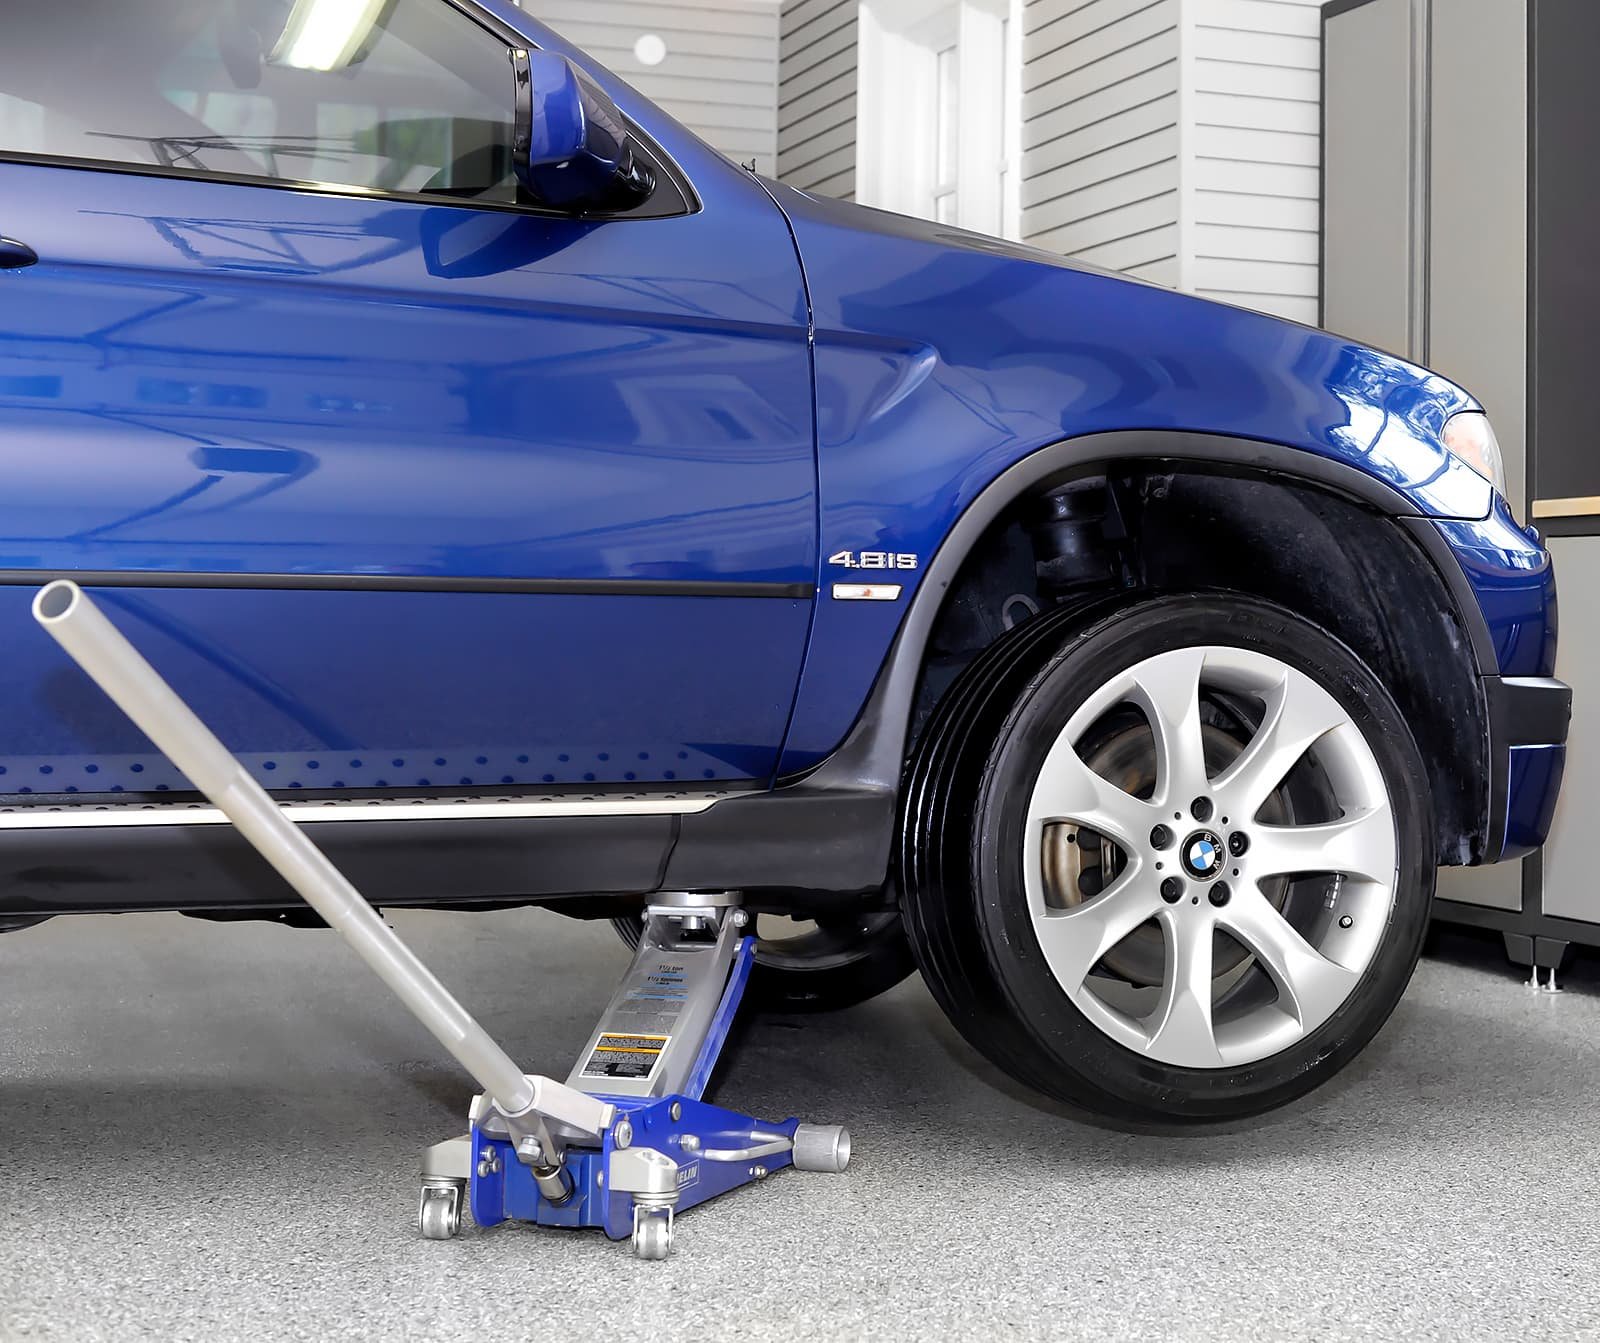 Car jack supporting a blue BMW on a durable polyaspartic floor in garage